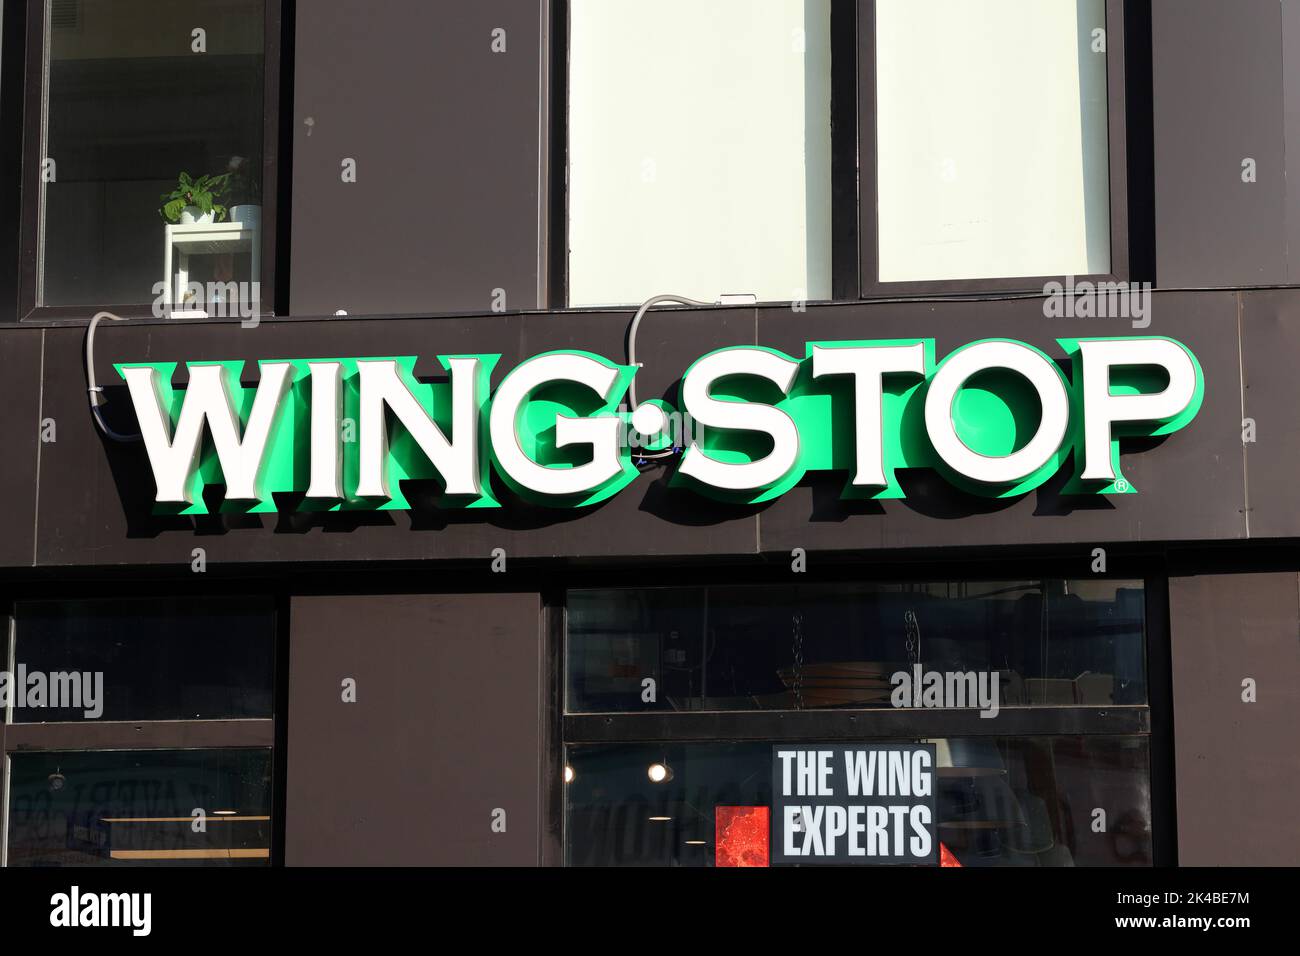 A Wing Stop fast food restaurant logo on a building Stock Photo